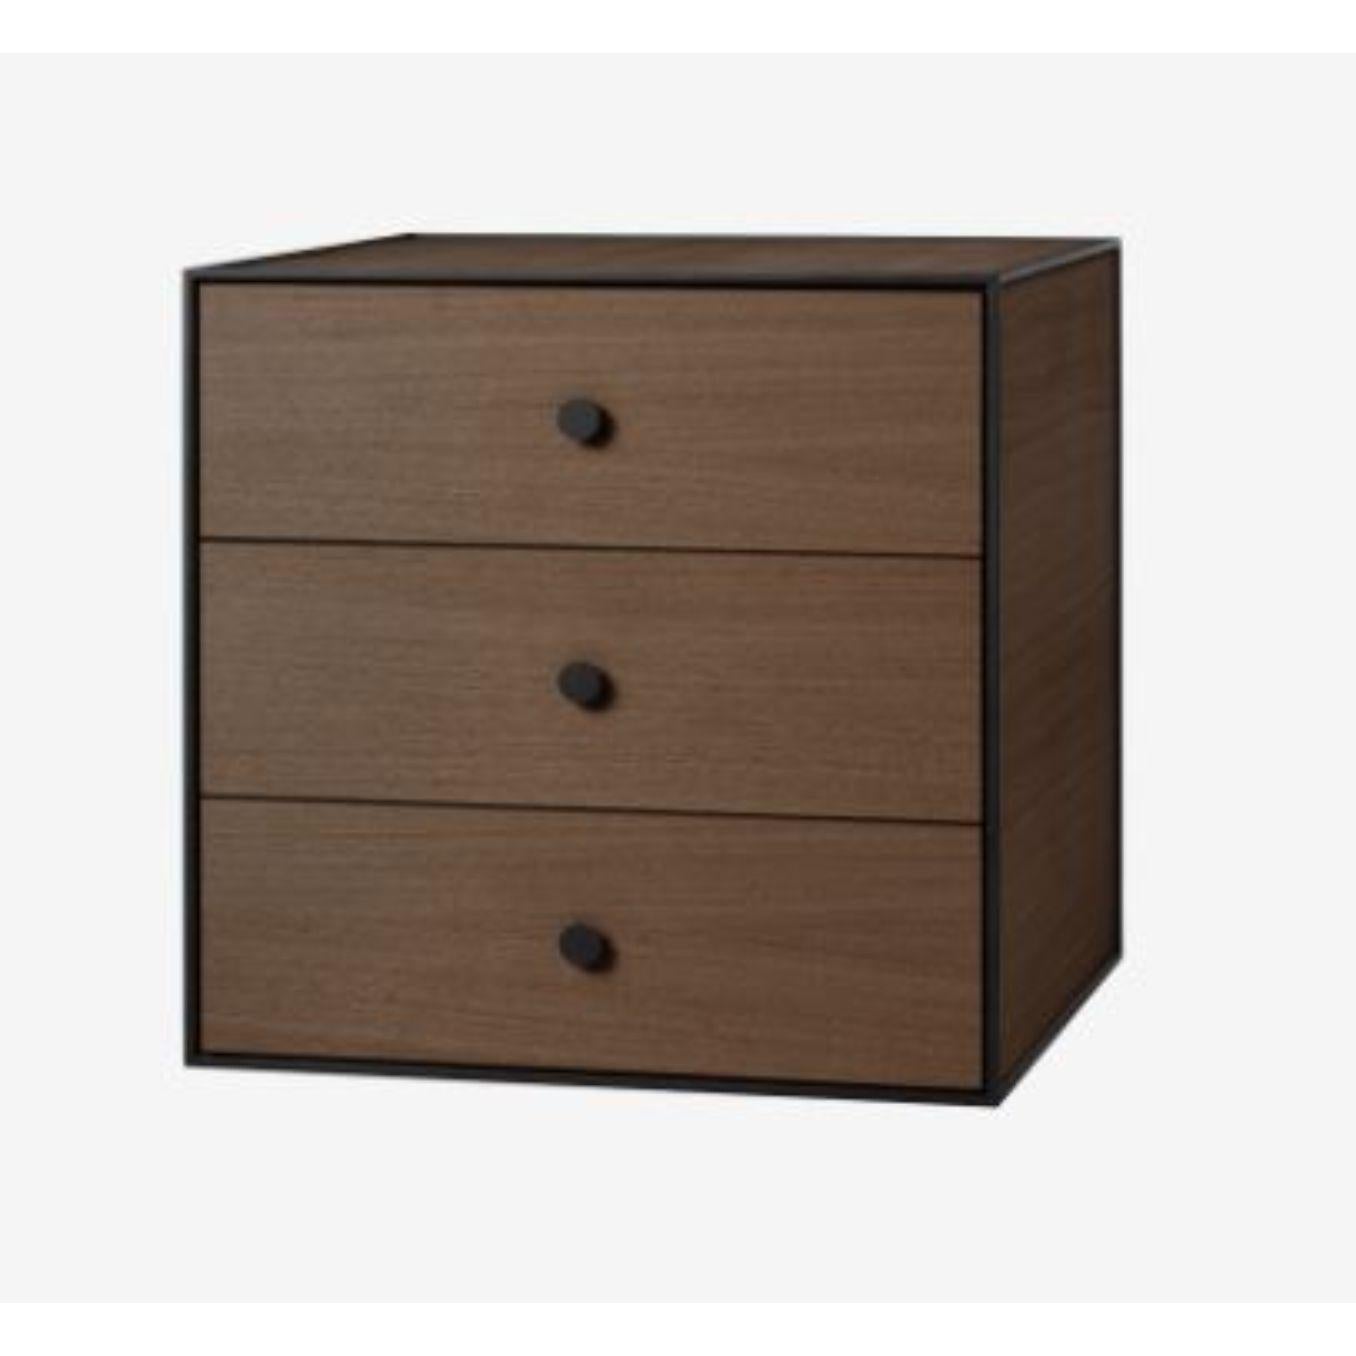 49 Smoked oak frame box with 3 drawers by Lassen
Dimensions: D 49 x W 42 x H 49 cm 
Materials: finér, melamin, melamin, melamine, metal, veneer, oak
Also available in different colors and dimensions. 
Weight: 24 Kg


By Lassen is a Danish